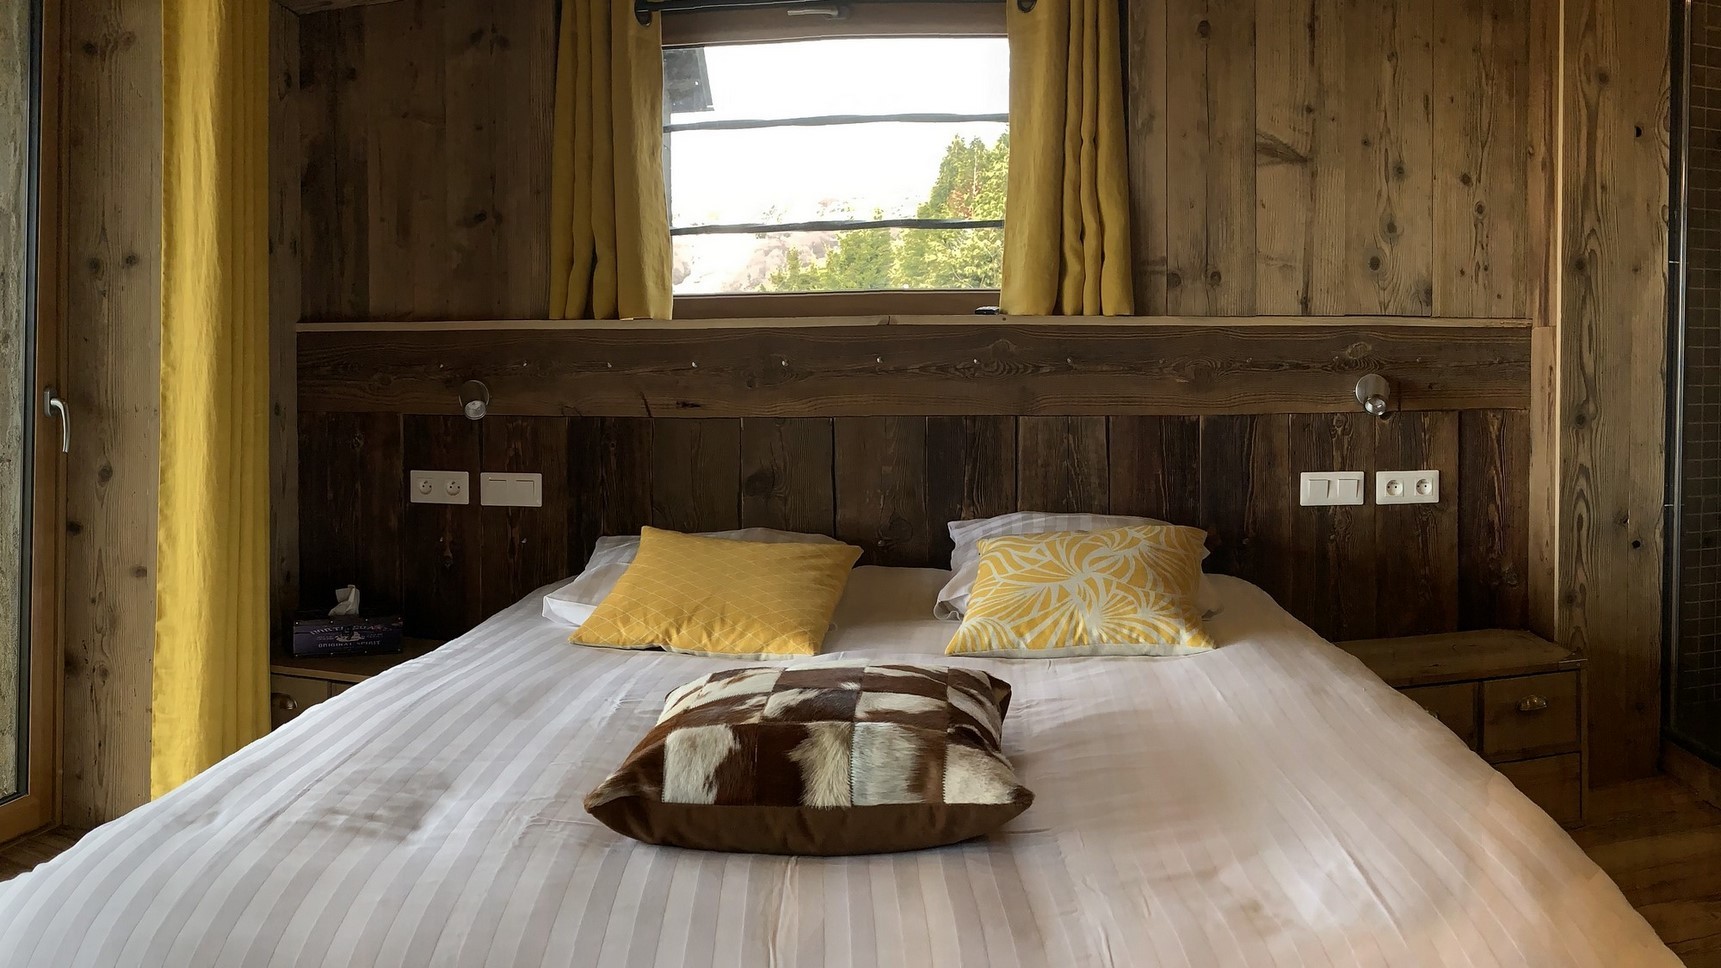 Super Besse chalet, Anorak chalet, waterfall bedroom, king size bed and cushions